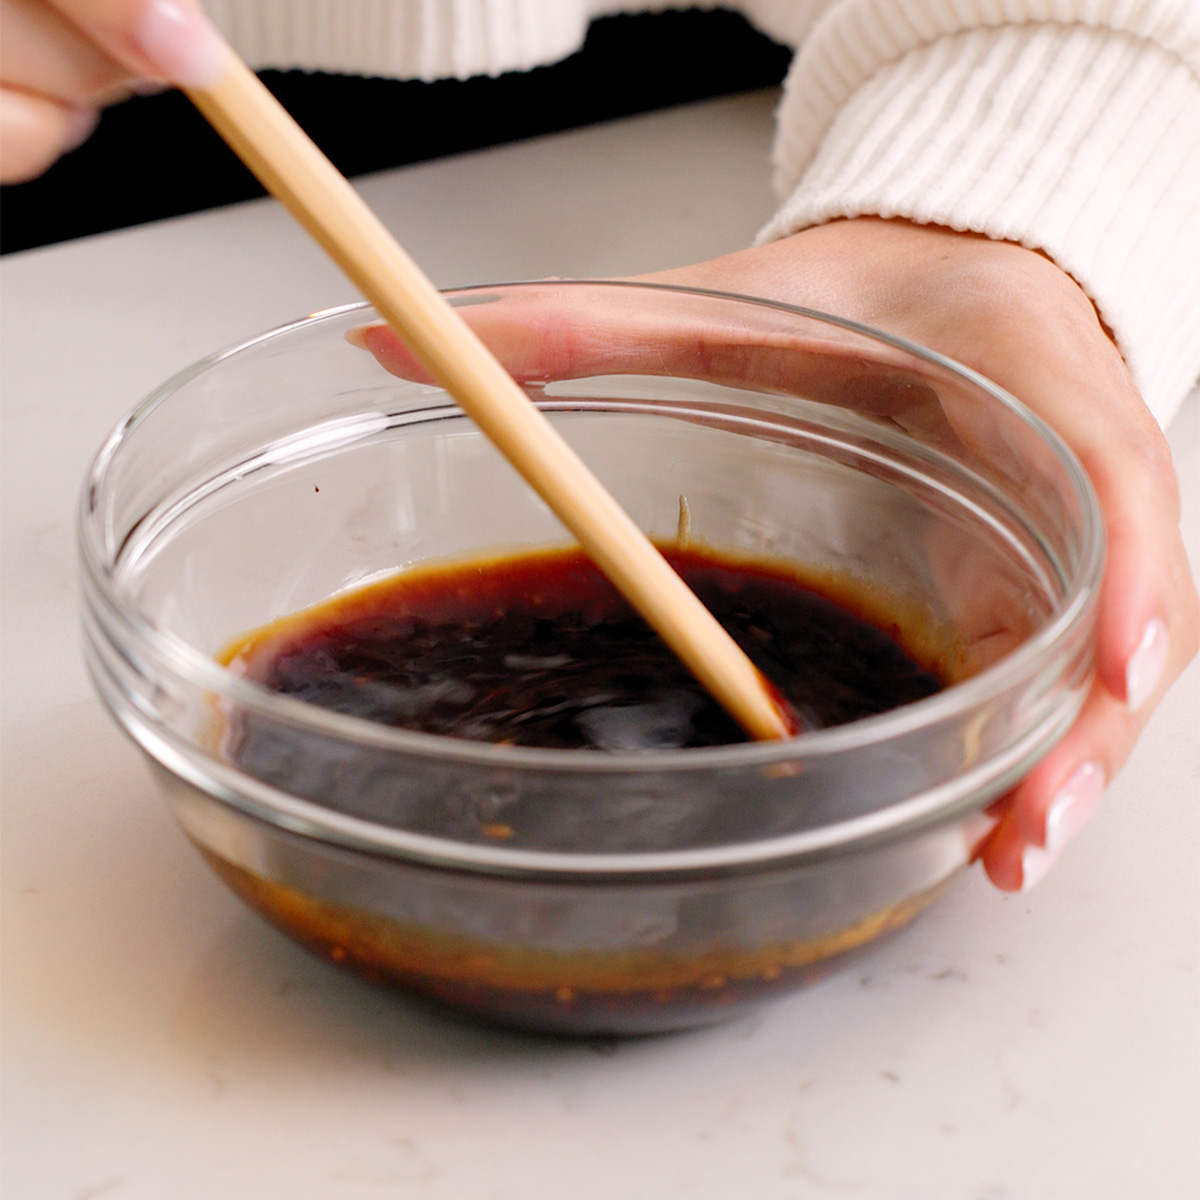 Mixing together yaki udon sauce in a small glass bowl.